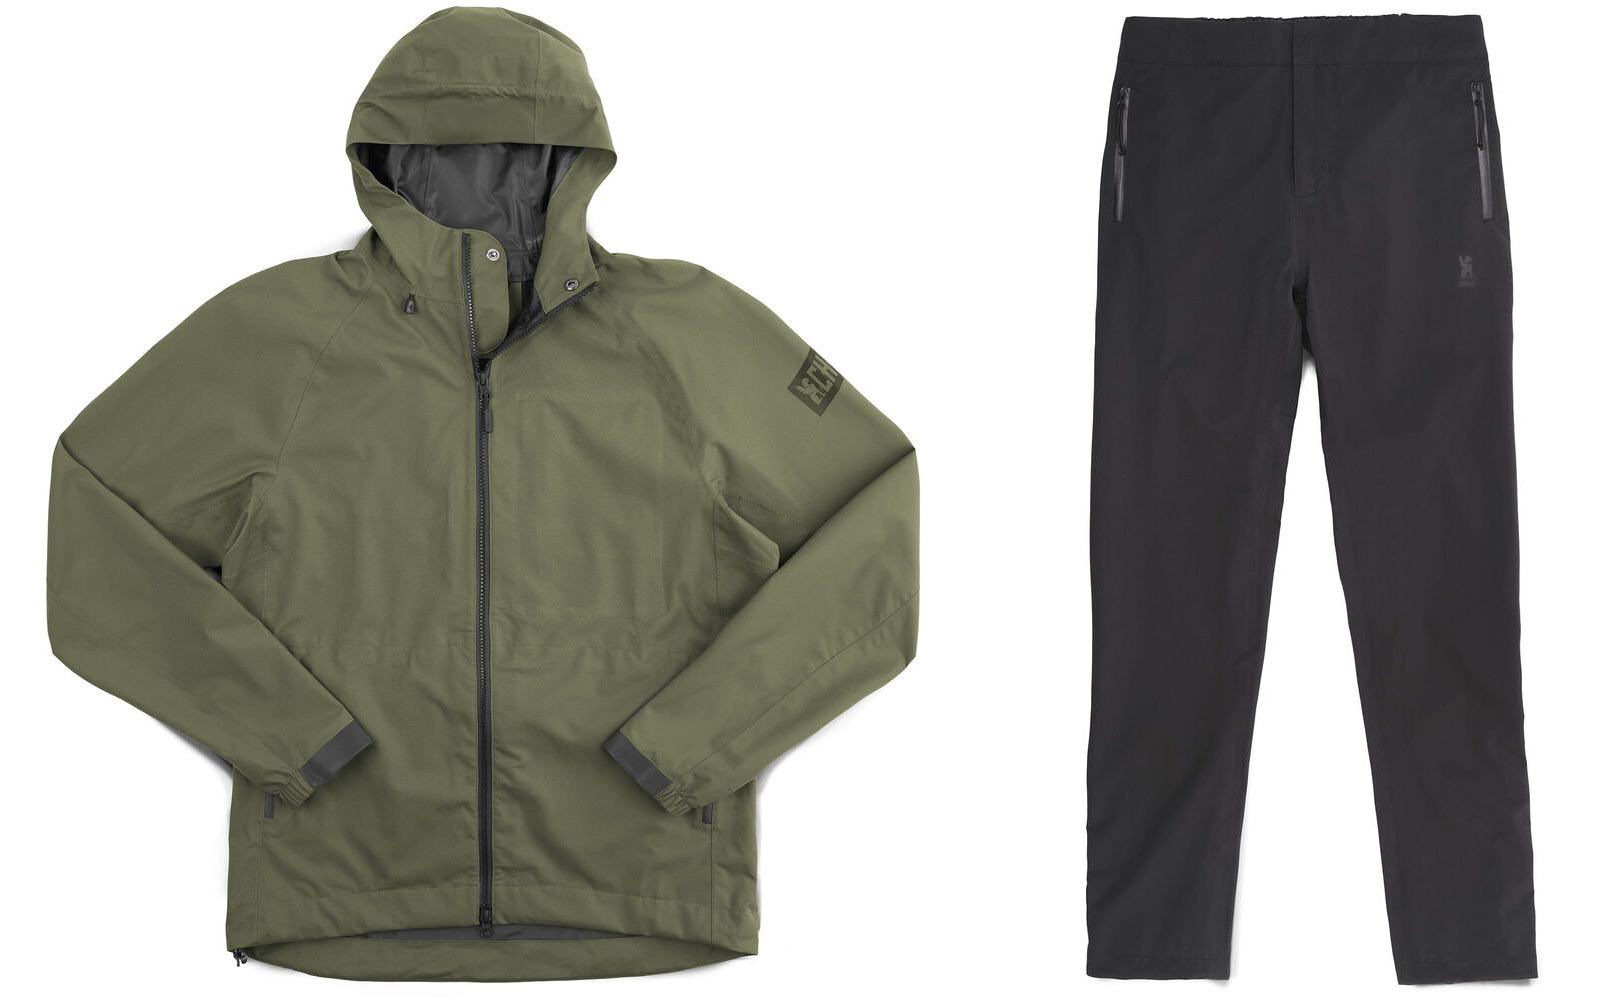 Chrome Industries storm rain pants and jacket for commuter cyclists